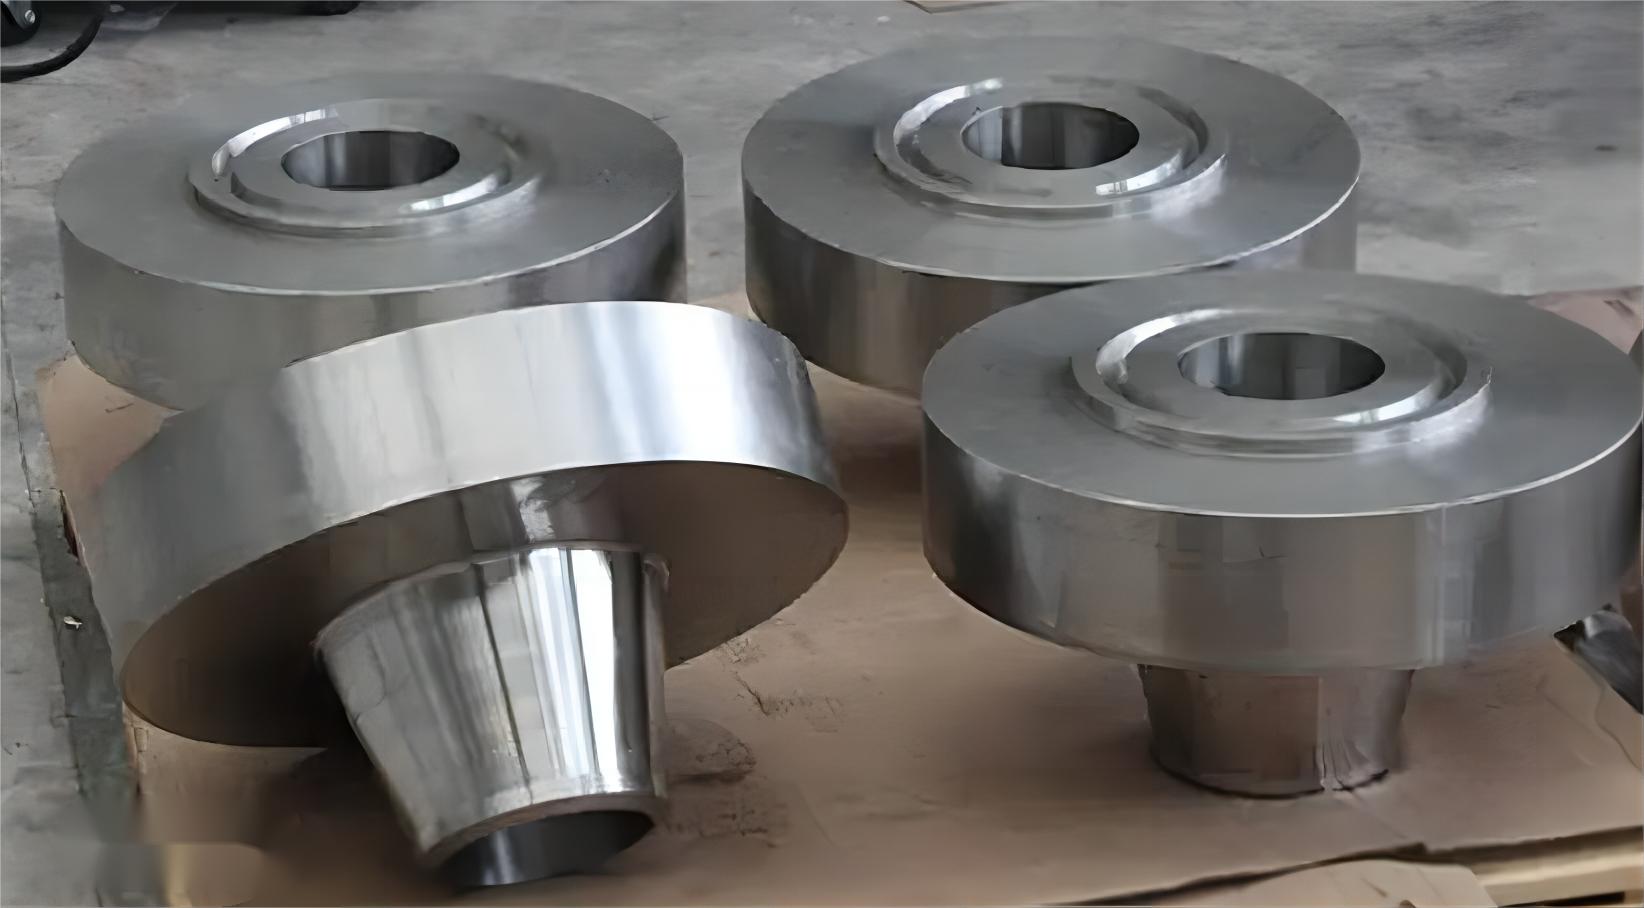 What are the impacts of different thicknesses flanges?